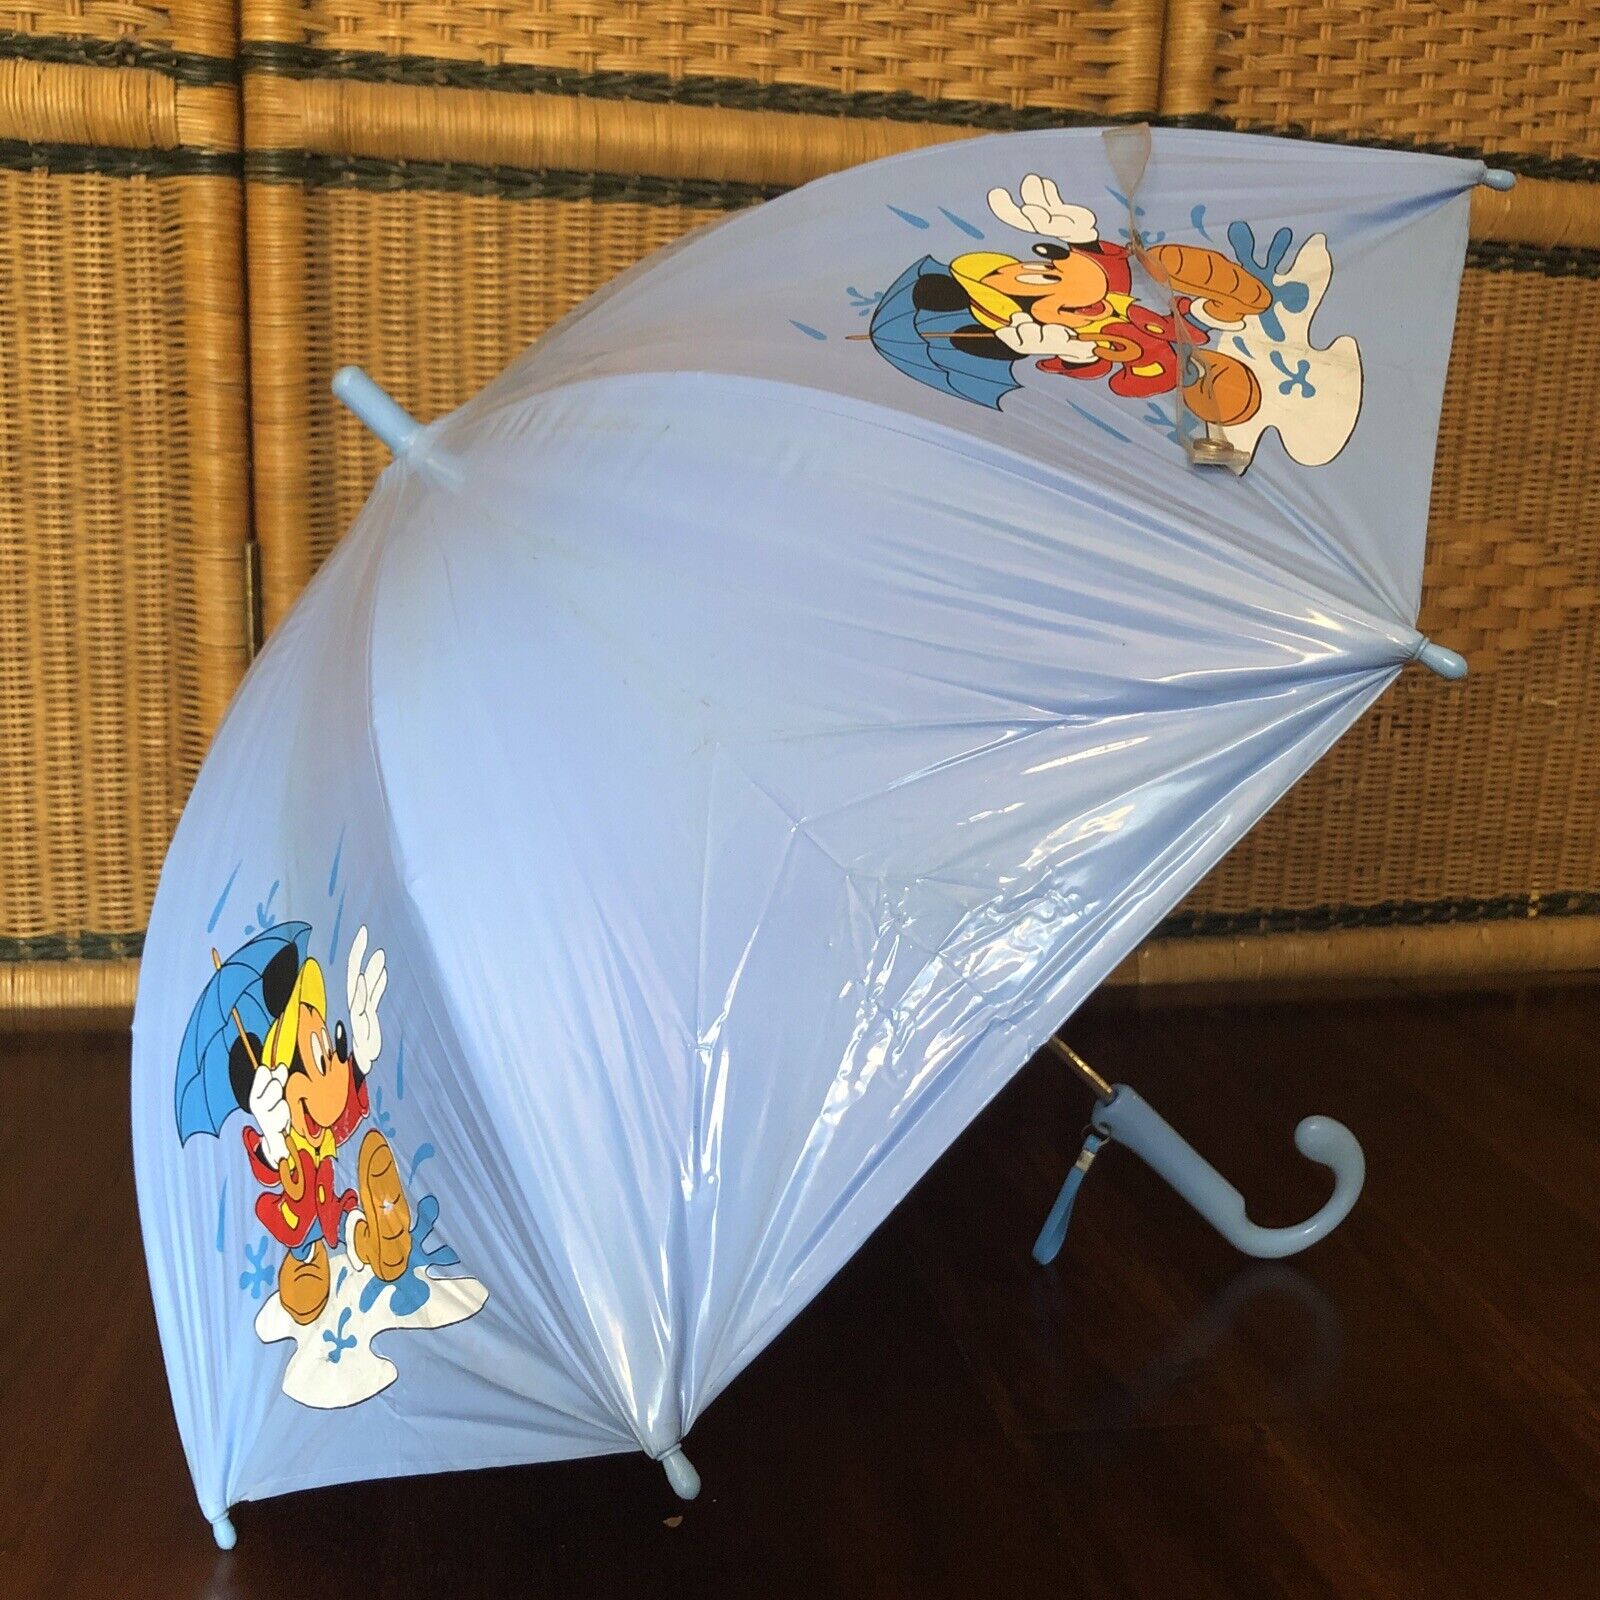 Vintage Mickey Mouse Folding Umbrella Blue Vinyl Made in Taiwan 24”